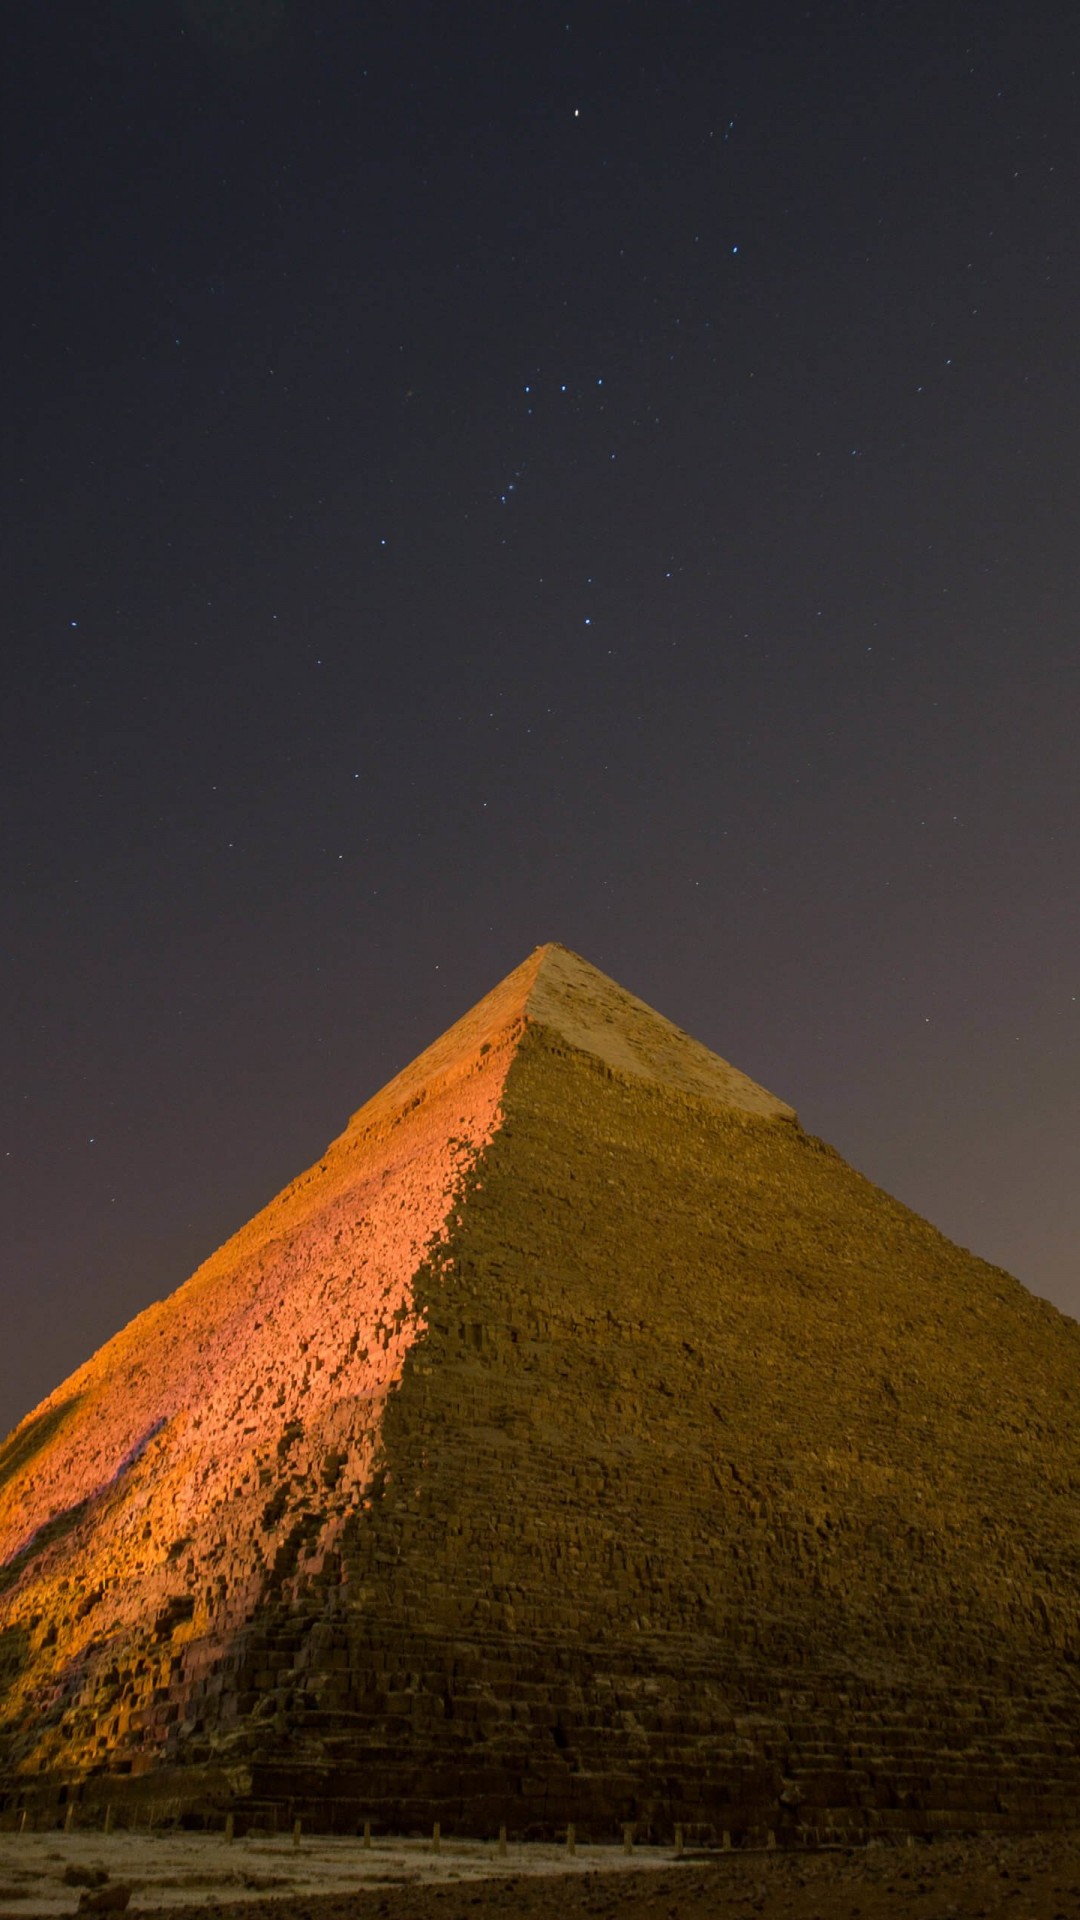 Pyramid by Night Wallpaper for HTC One